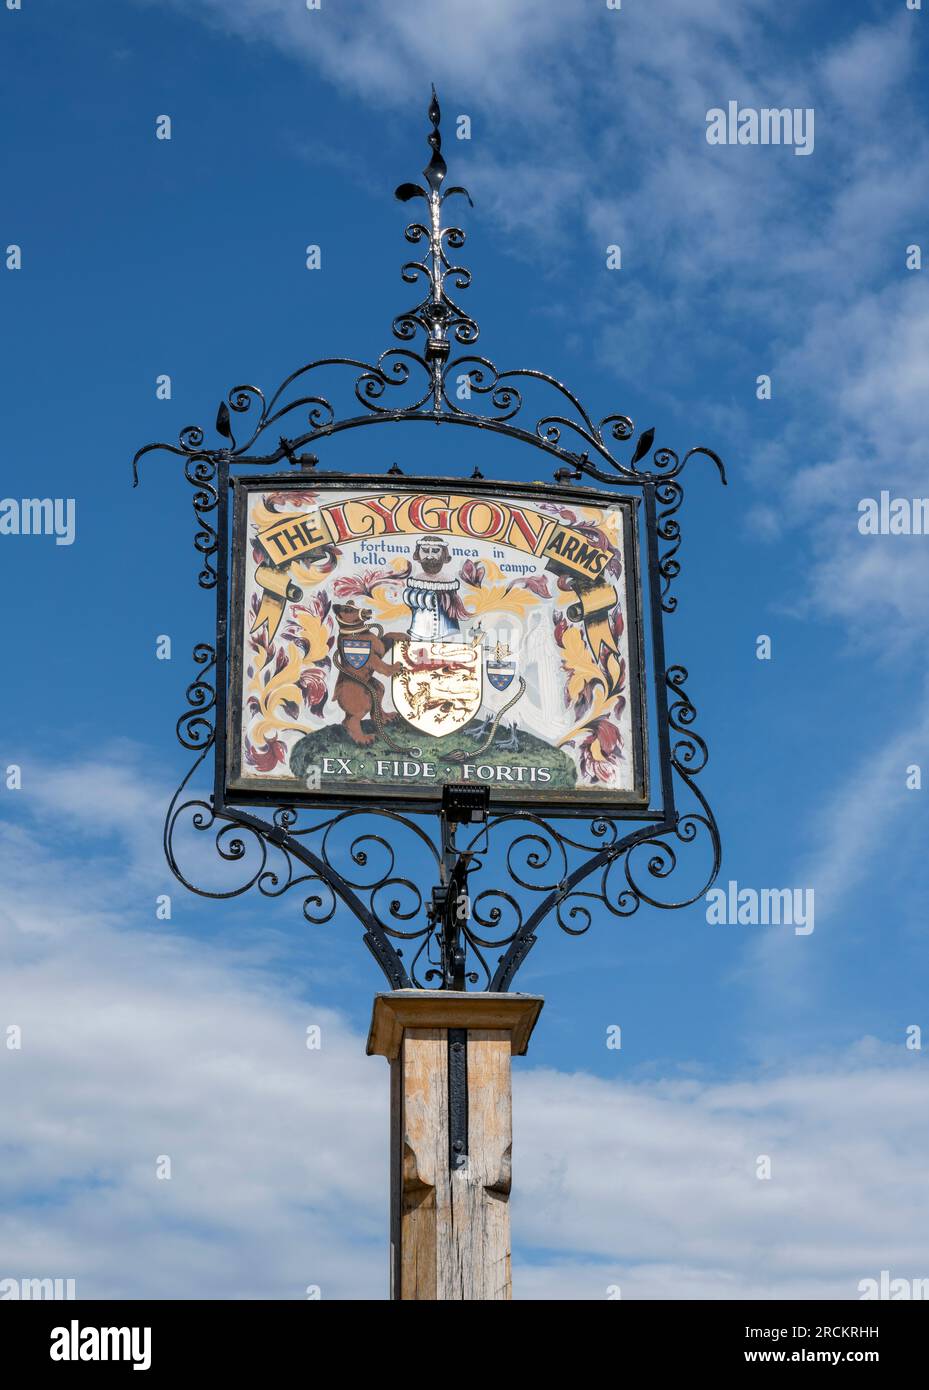 Traditional hanging pub sign at The Lygon Arms Public House, High Street, Broadway, Cotswolds, Worcestershire, England, UK Stock Photo